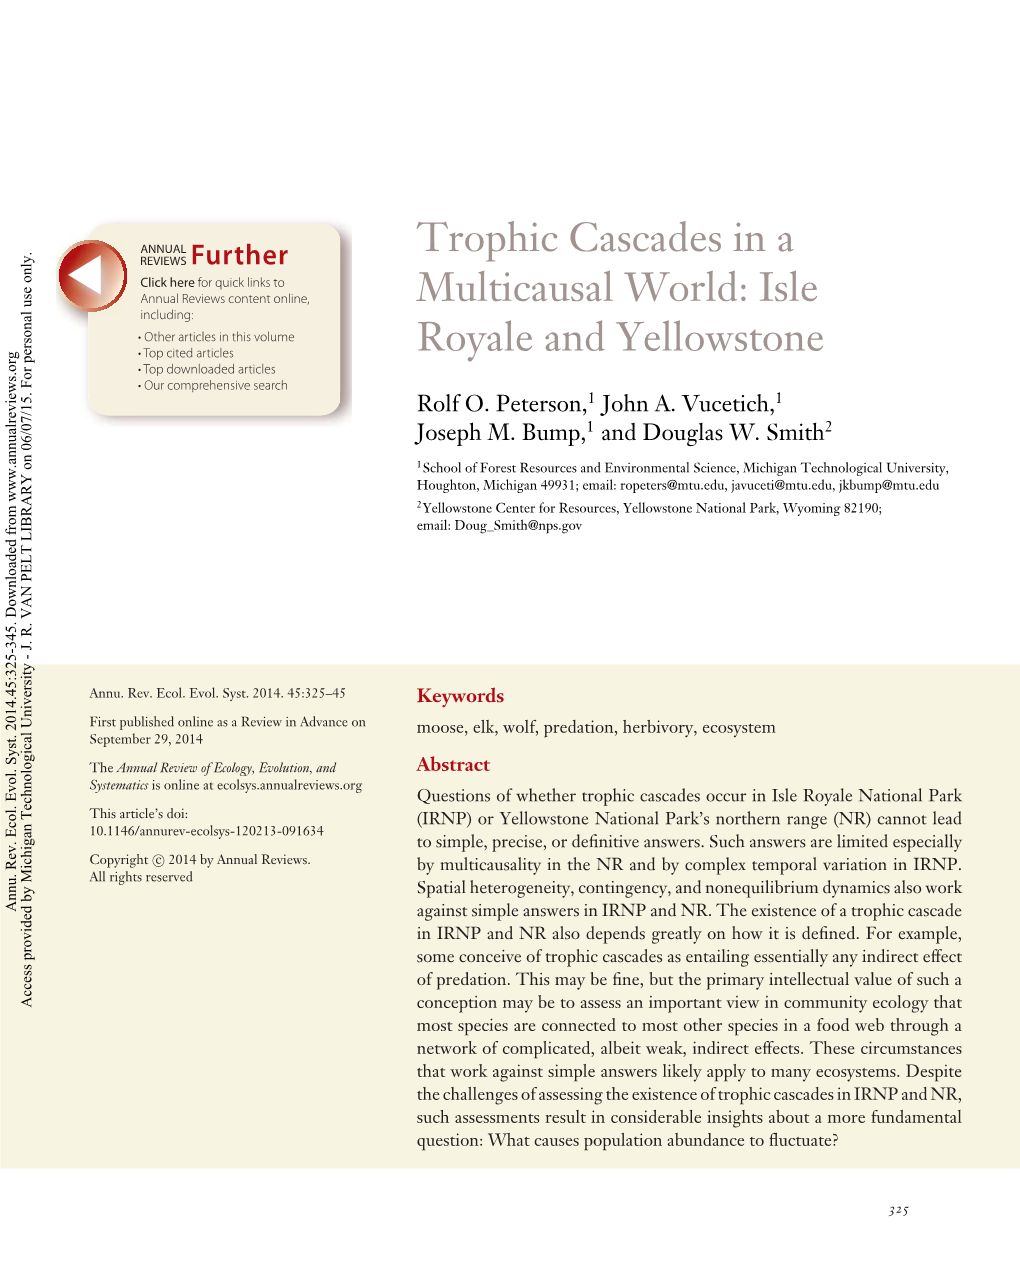 Trophic Cascades in a Multicausal World: Isle Royale and Yellowstone